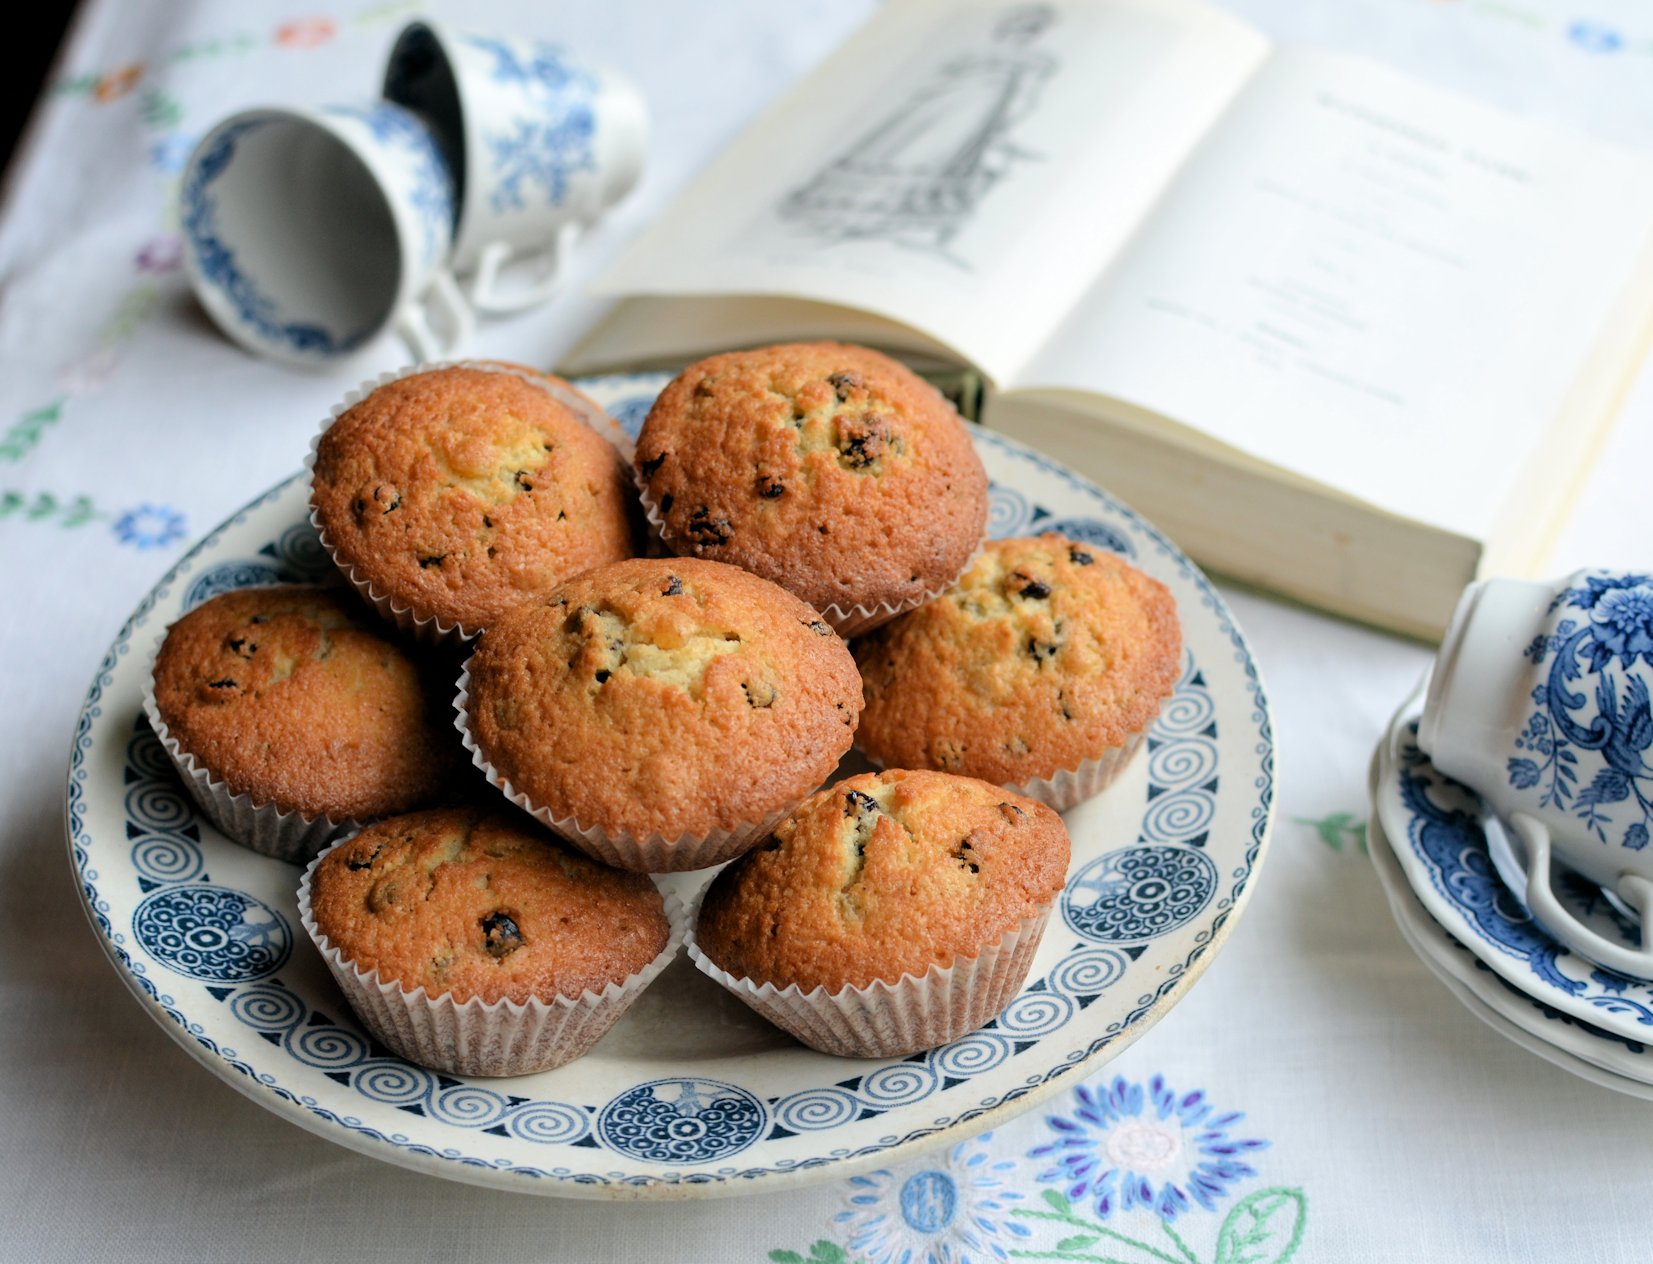 Queen cakes - 18th century dainty bakes - Miss Foodwise